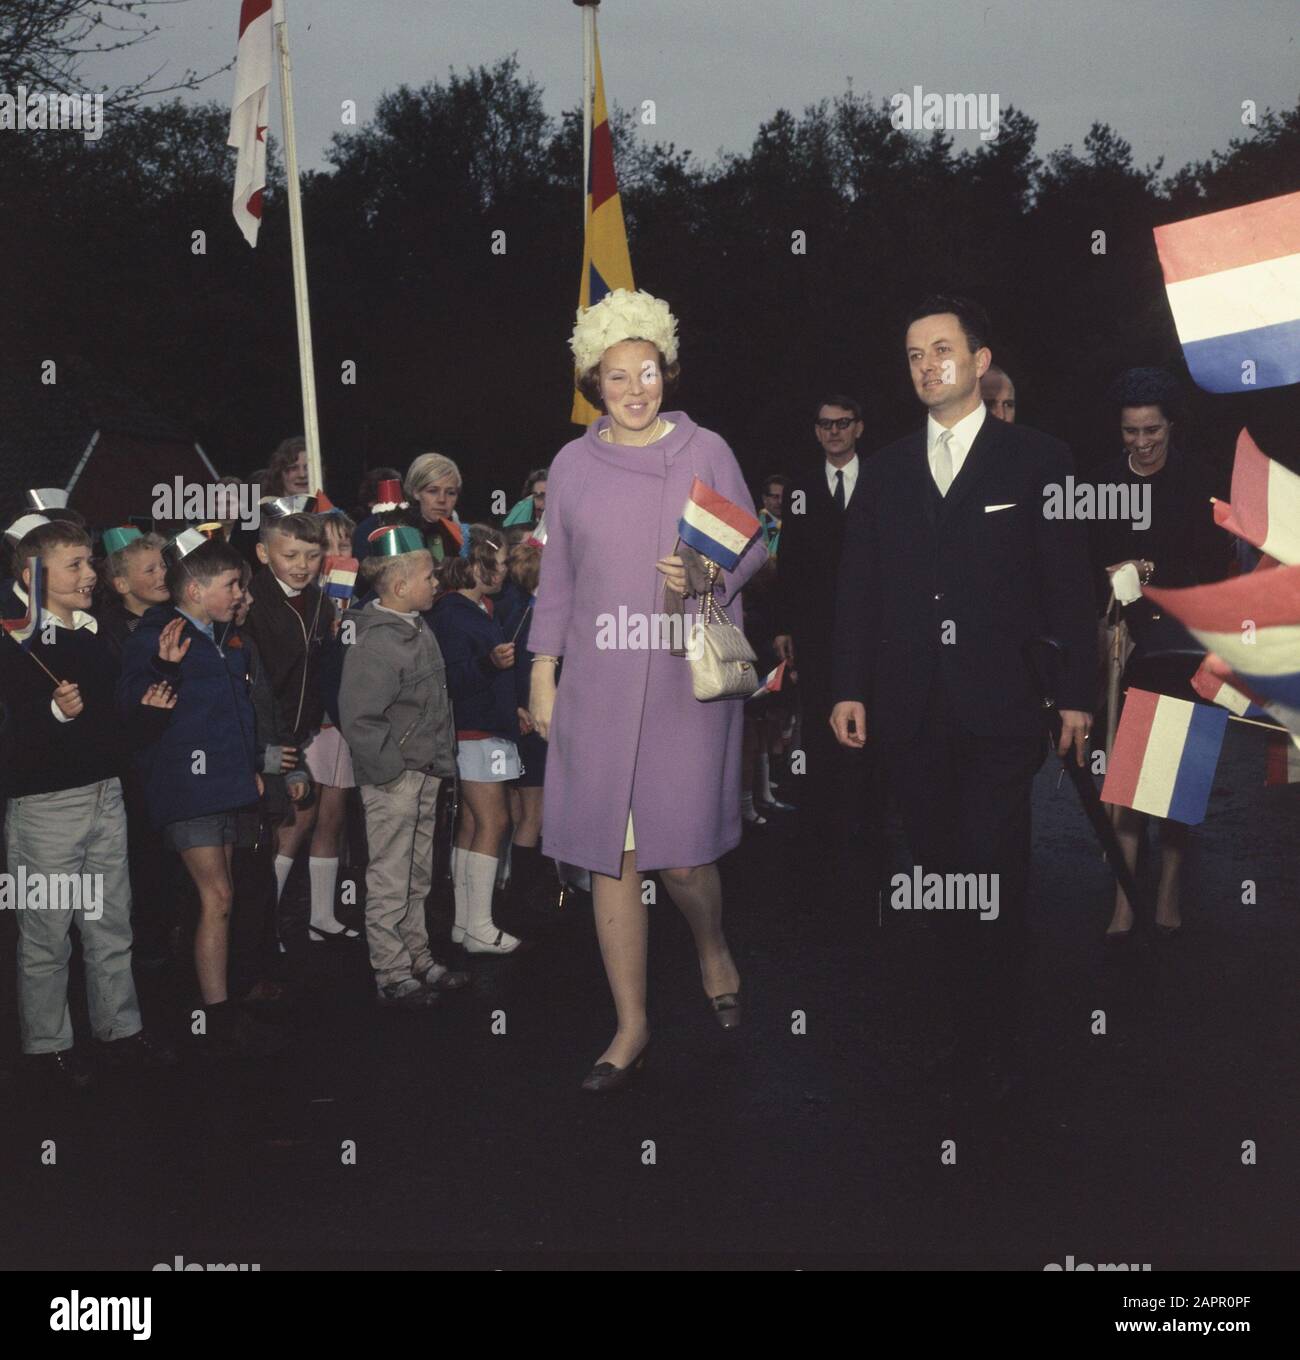 Her Royal Highness Princess Beatrix in Roden (Drenthe) opens holiday centre for disabled youth, Prince Willem Alexander farm Date: 8 May 1968 Location: Drenthe, Roden Keywords: ARGINES, openings Personal name: Beatrix, princess Stock Photo